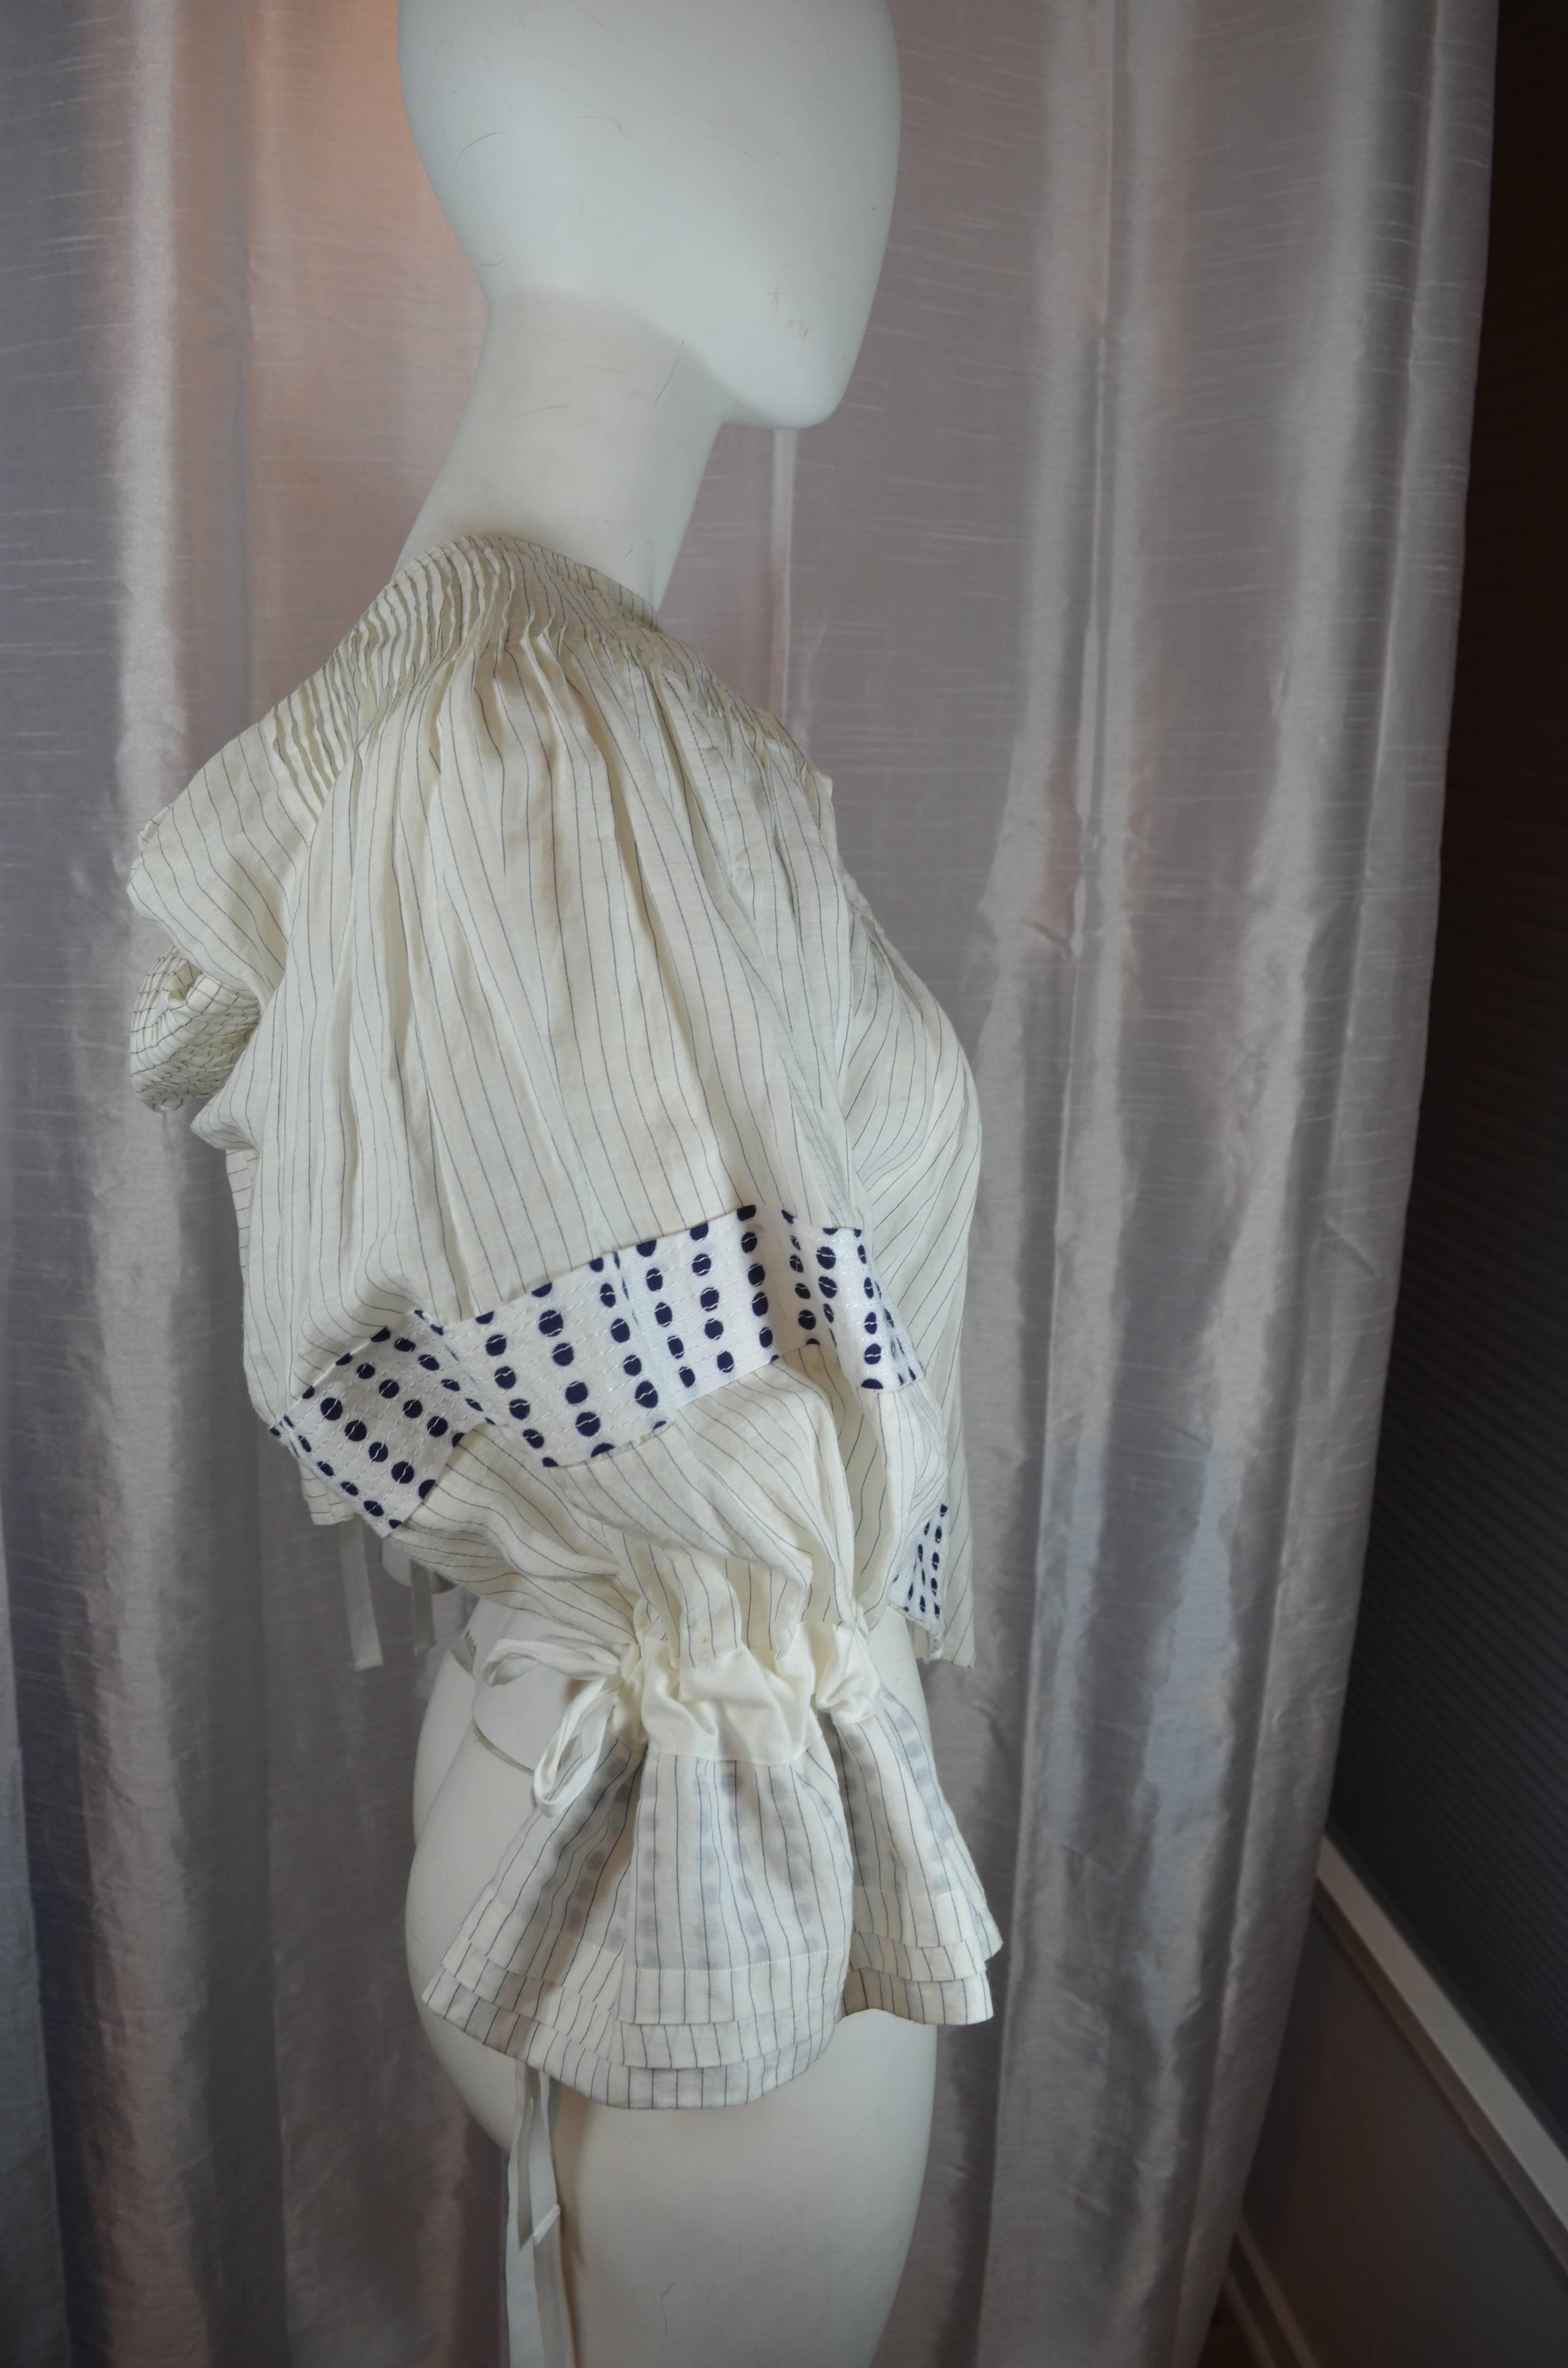 Tao Kurihara Comme des Garçons Blouse 2007

Cotton shirting material peasant blouse with striped and polka dot patterns in blue and white lightweight shirt fabric. Pleating throughout, unfinished hem, peasant sleeves with drawstring wrist ties.